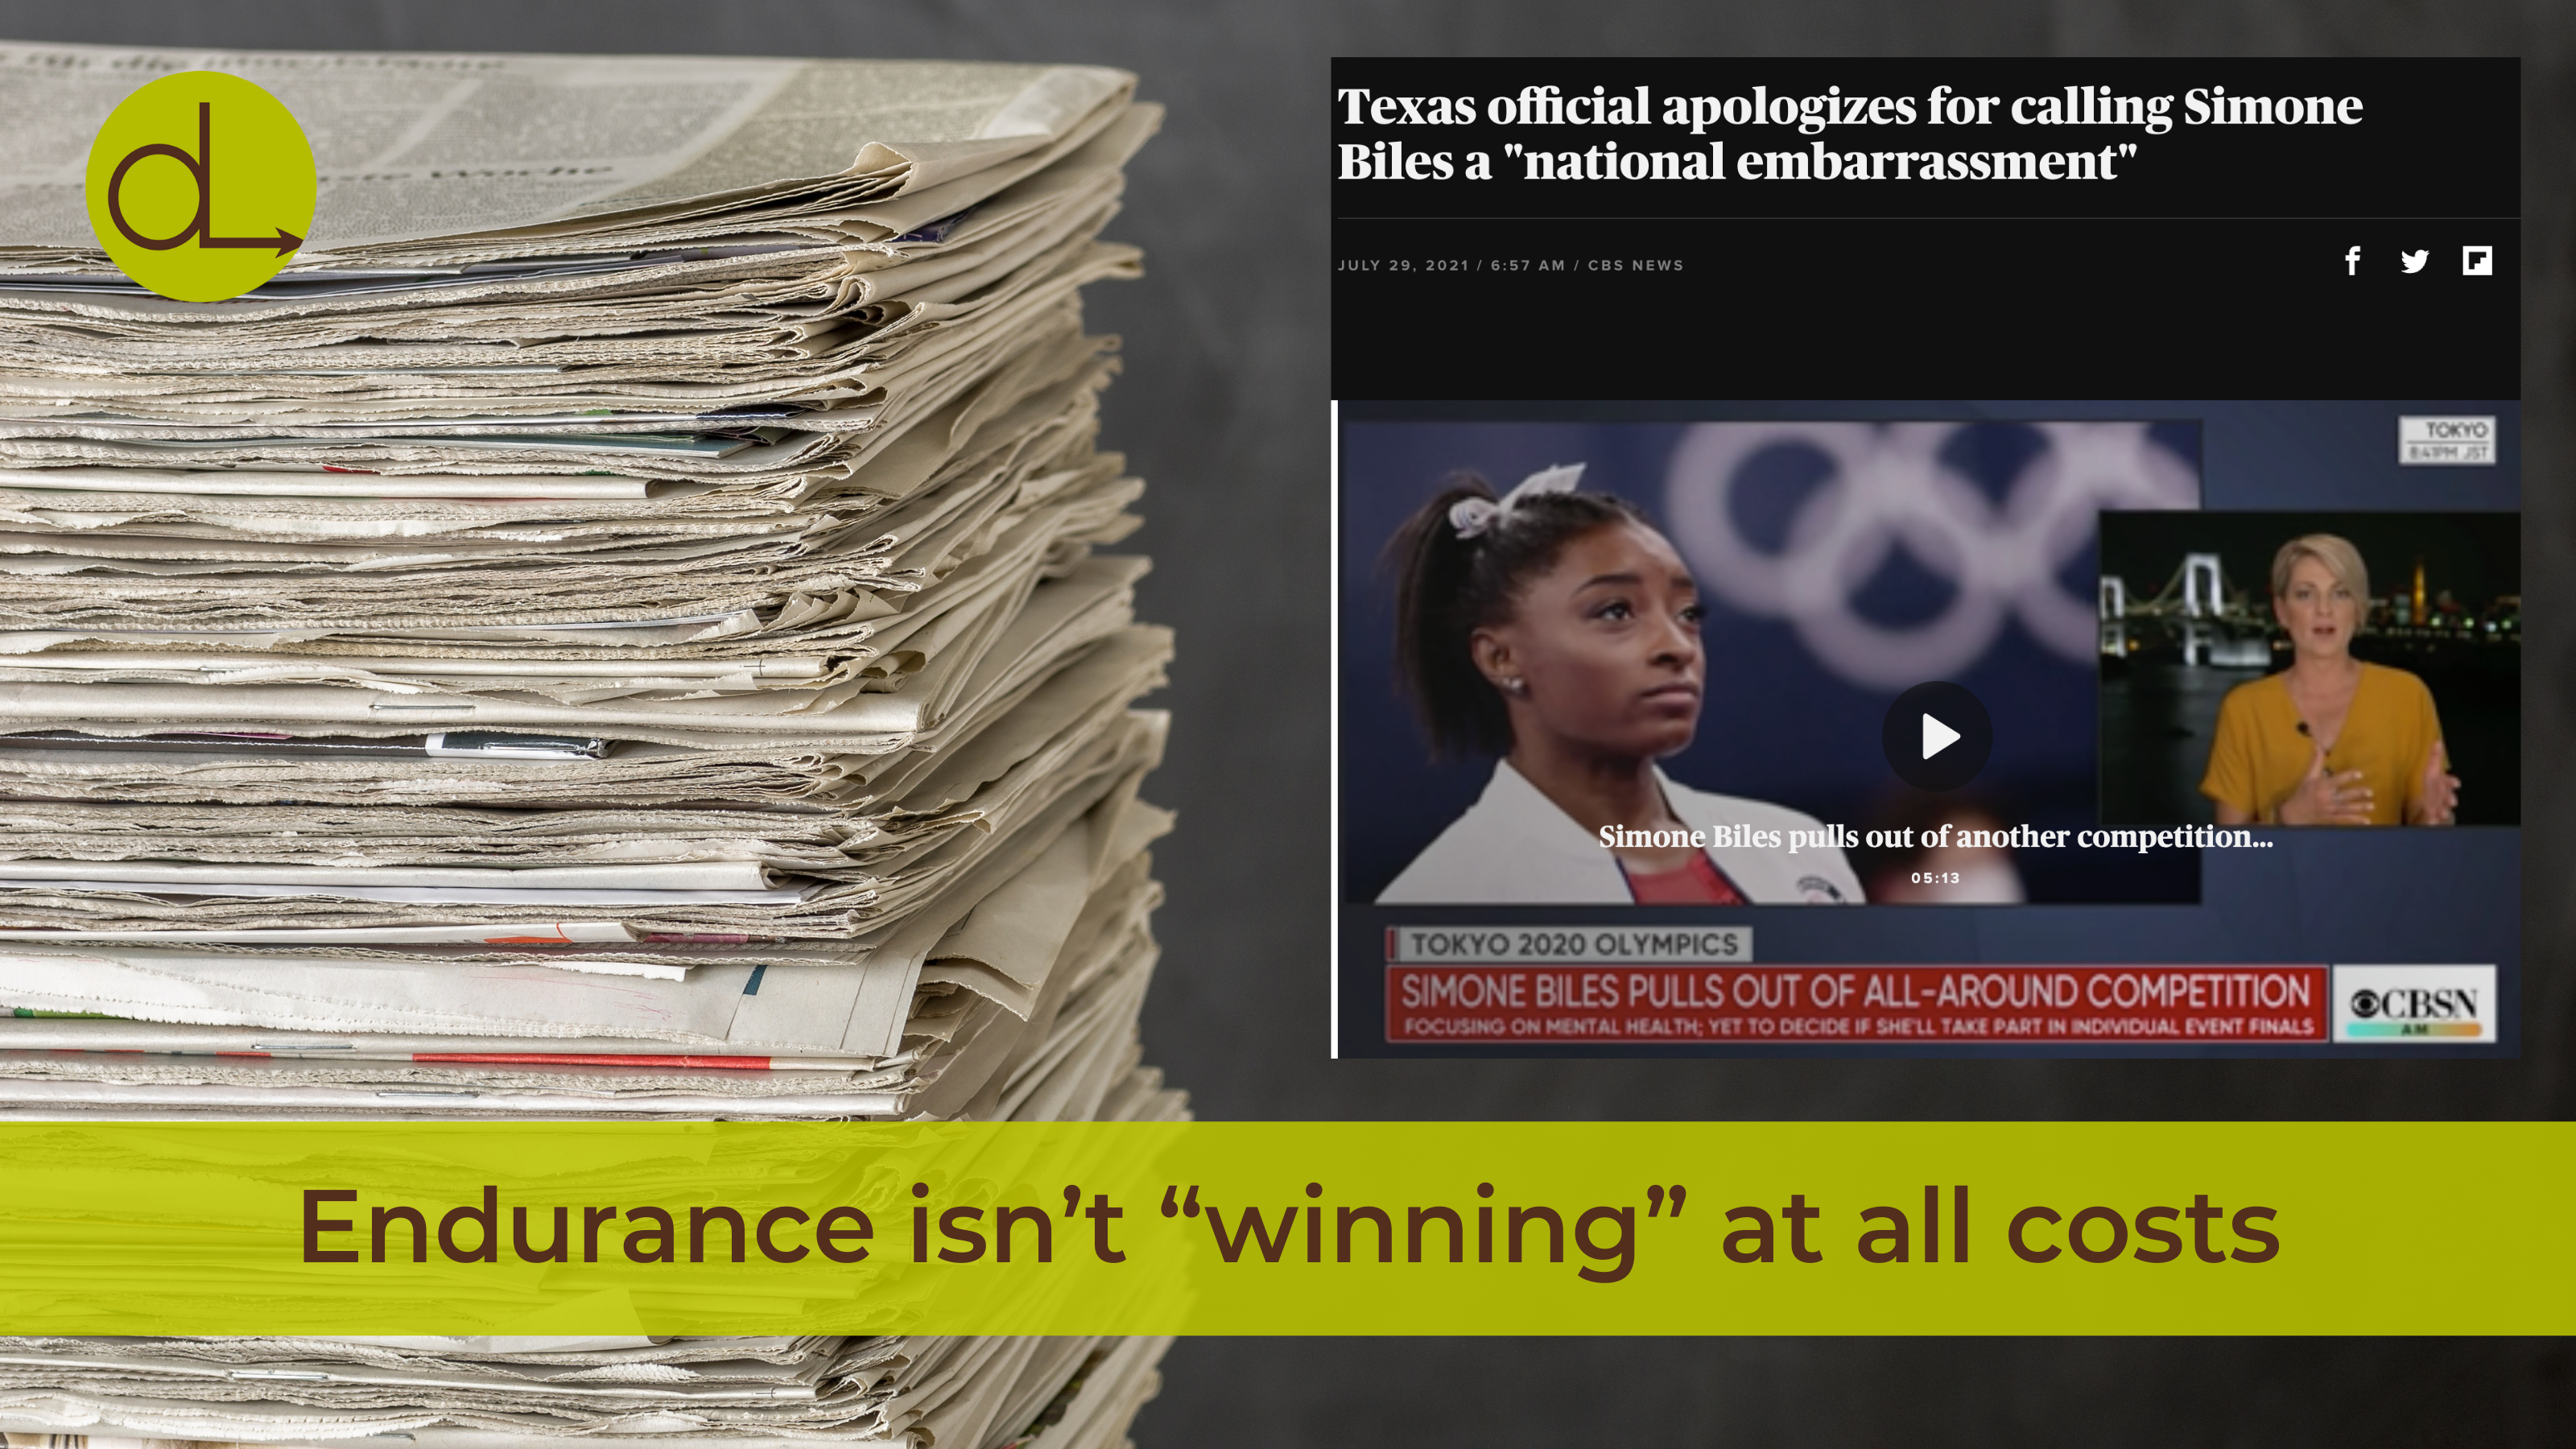 Stack of newspapers on the left and a screenshot of a Headline about Simone Biles withdrawing from the Olympics. Title reads: Endurance isn't "winning" at all costs.